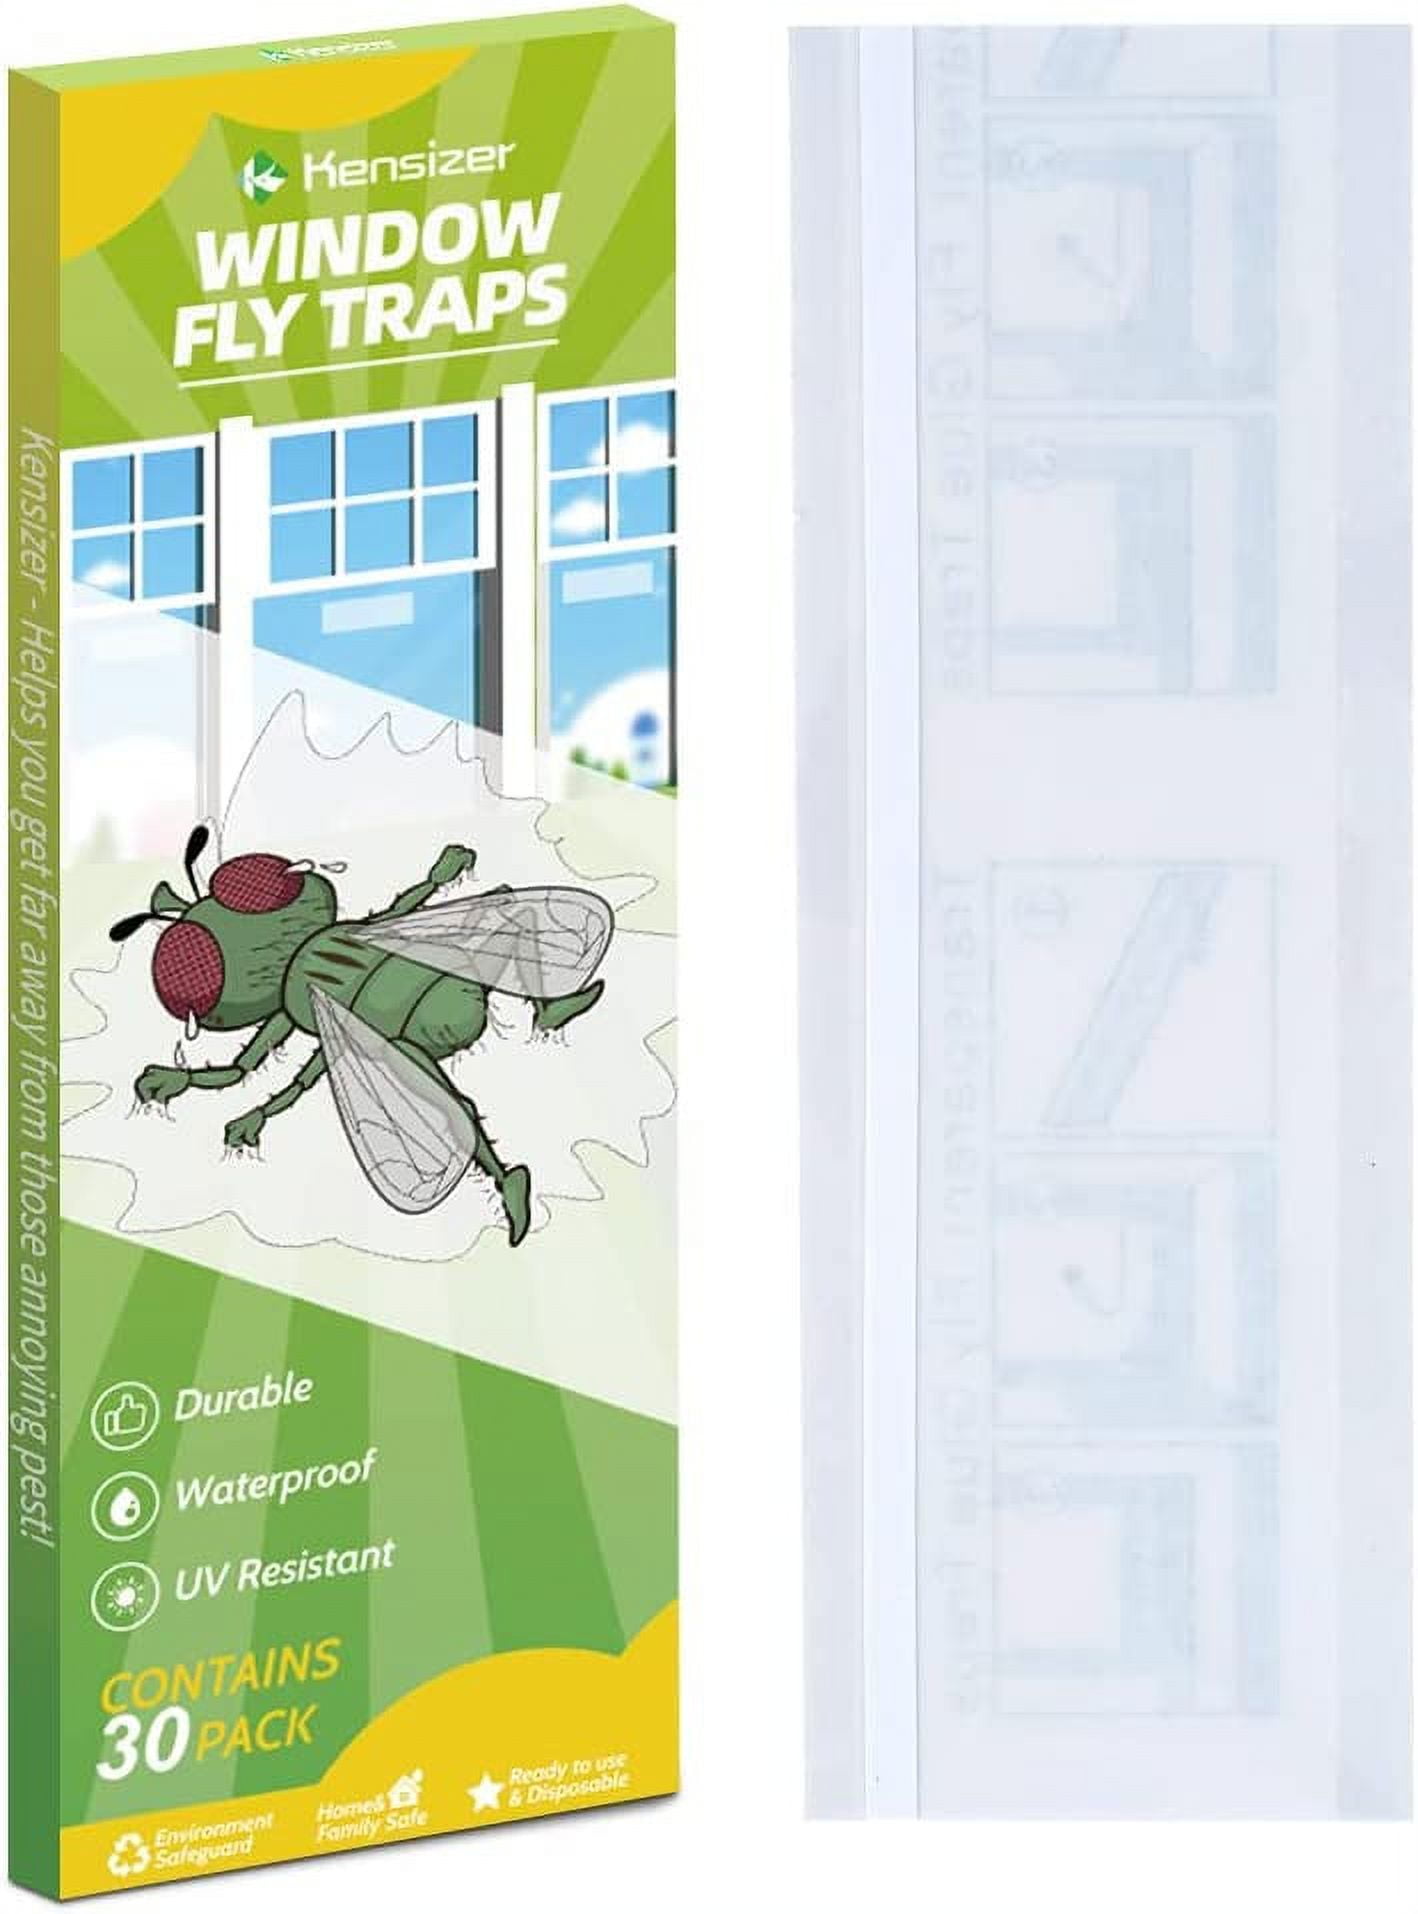 Flies & Bug Window Fly Trap - Indoor / Outdoor Non Toxic Clear Window Fly  Traps 